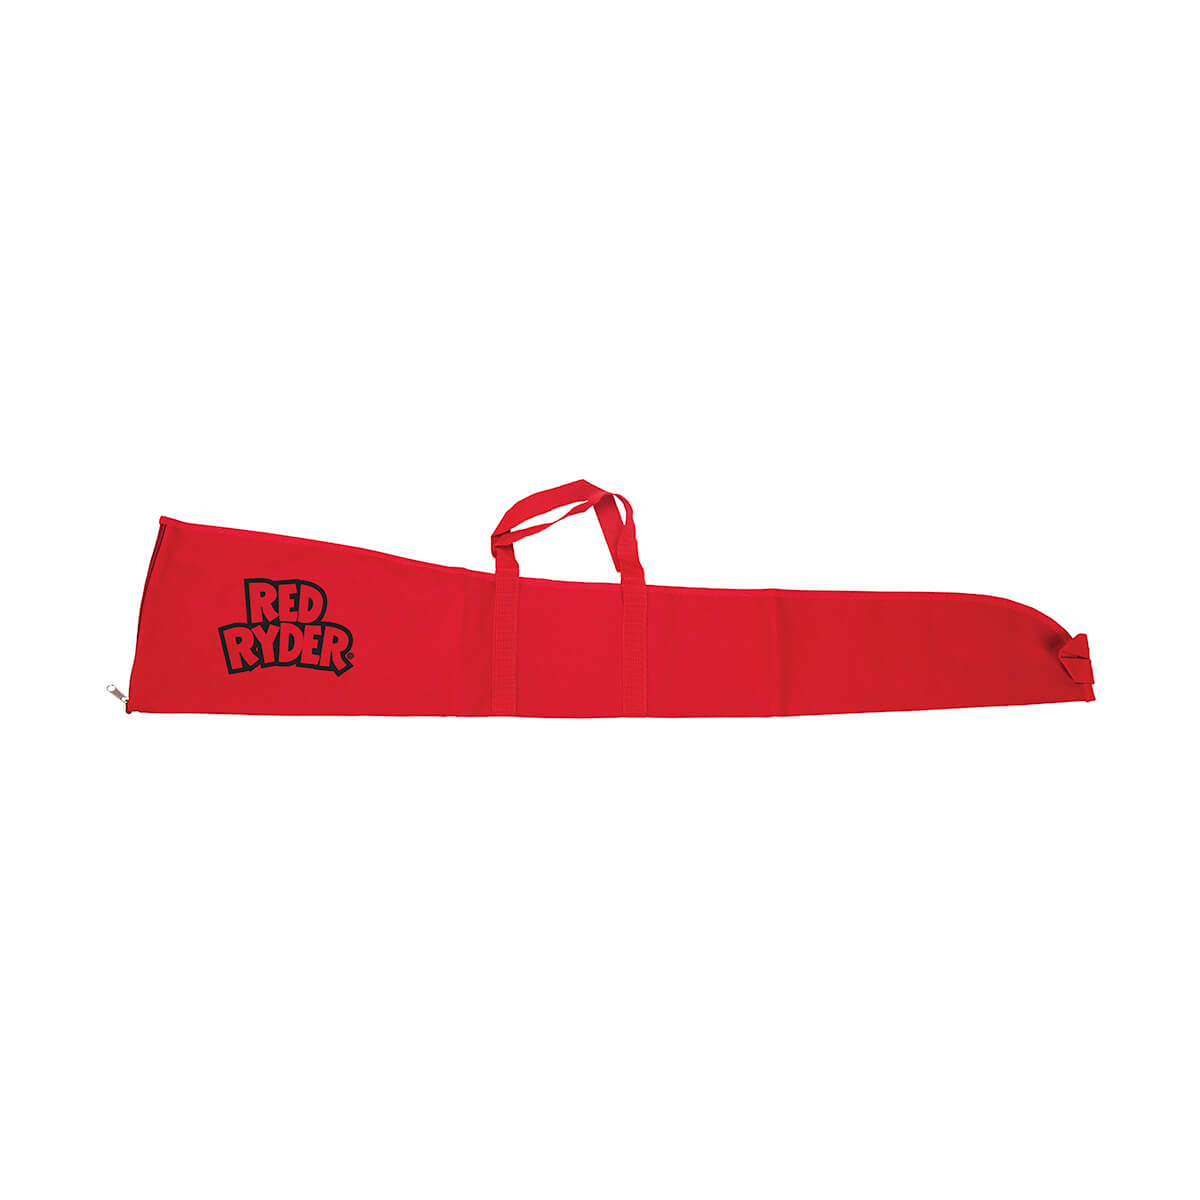 Daisy 993161306 Red Ryder Gun Sleeve for sale online 